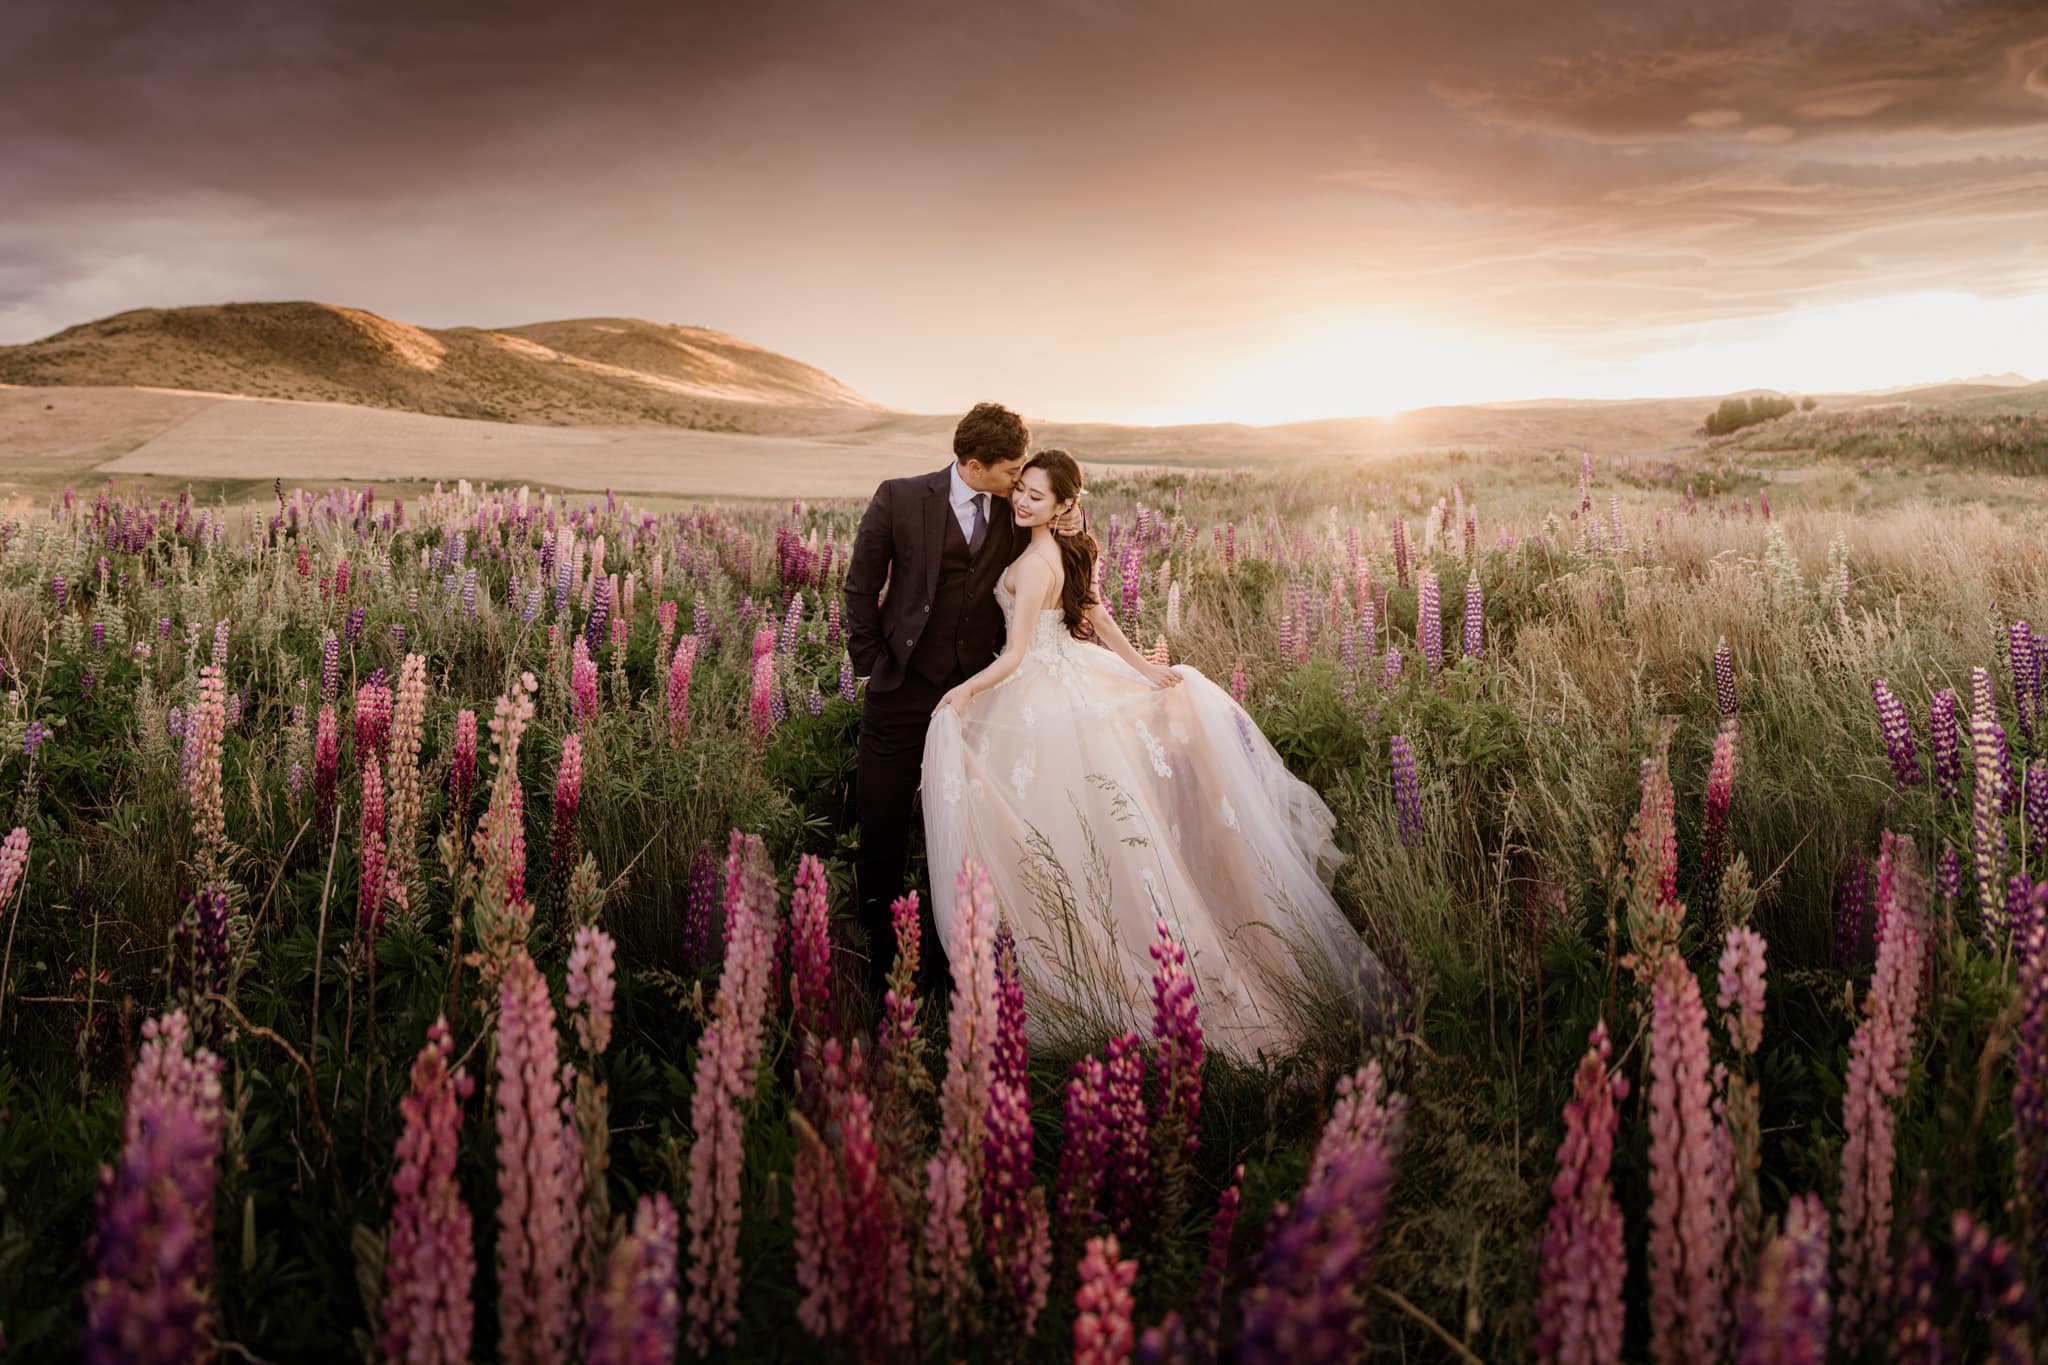 About Us: A couple celebrates their love in a picturesque field of flowers.